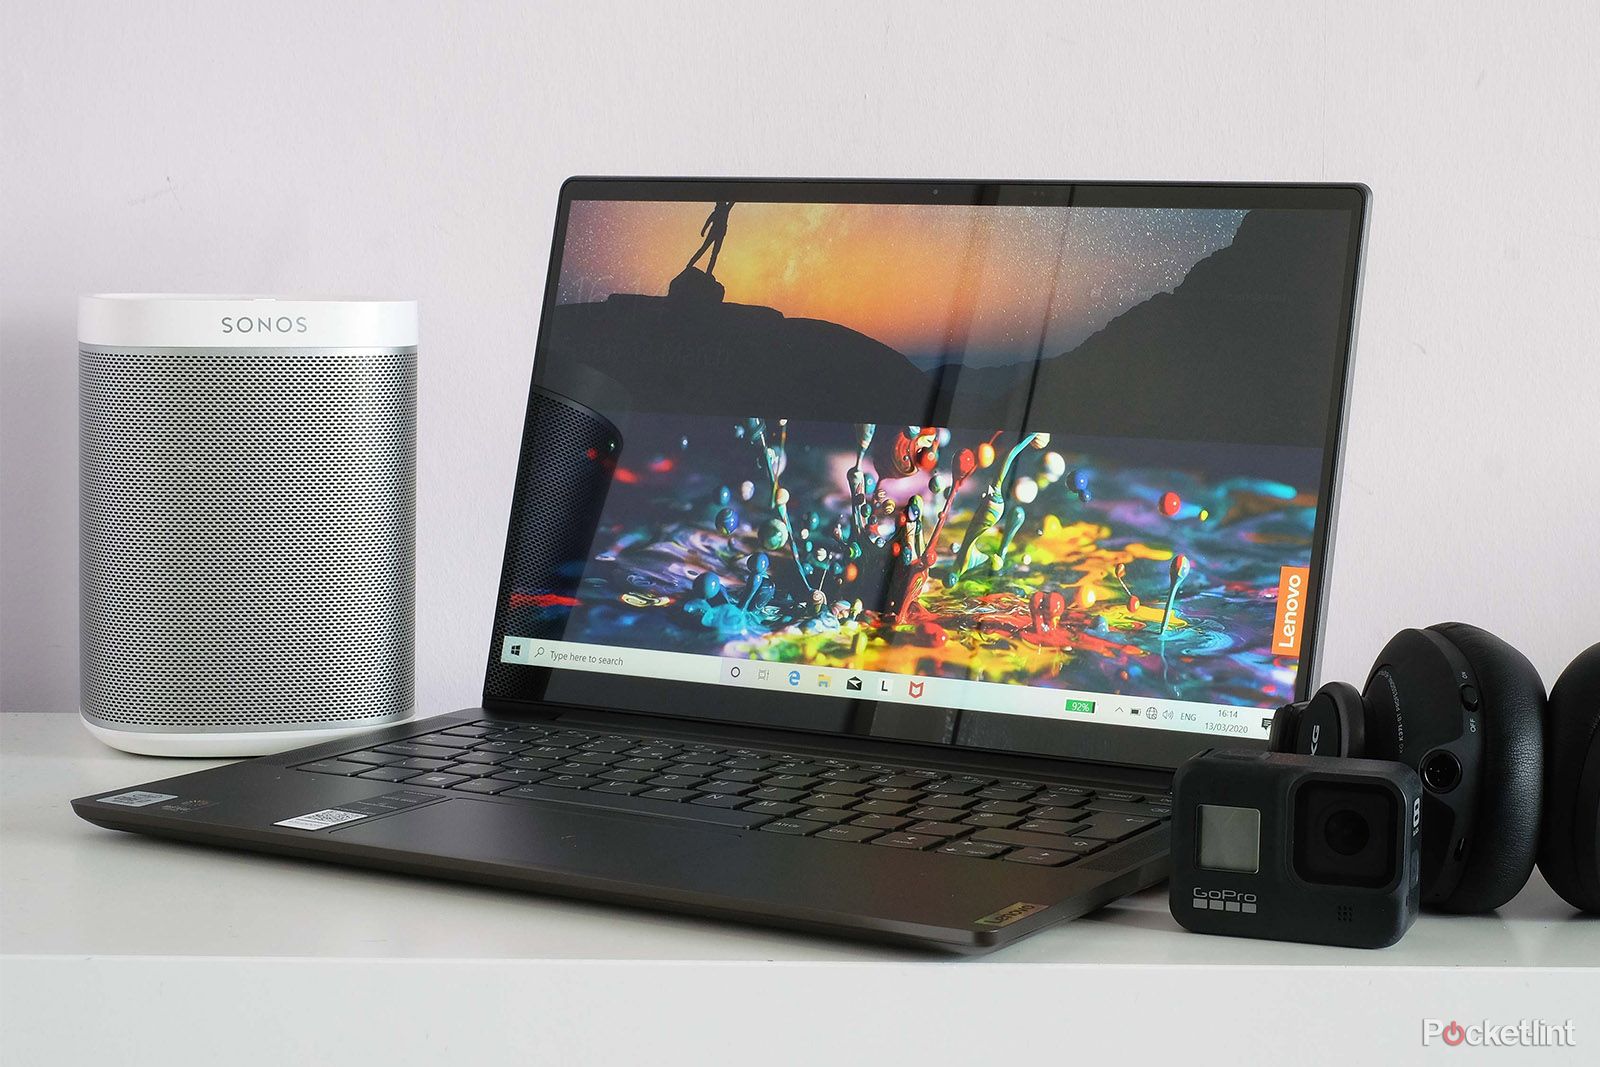 Lenovo Yoga S740 (14-inch) review: Pure laptop perfection